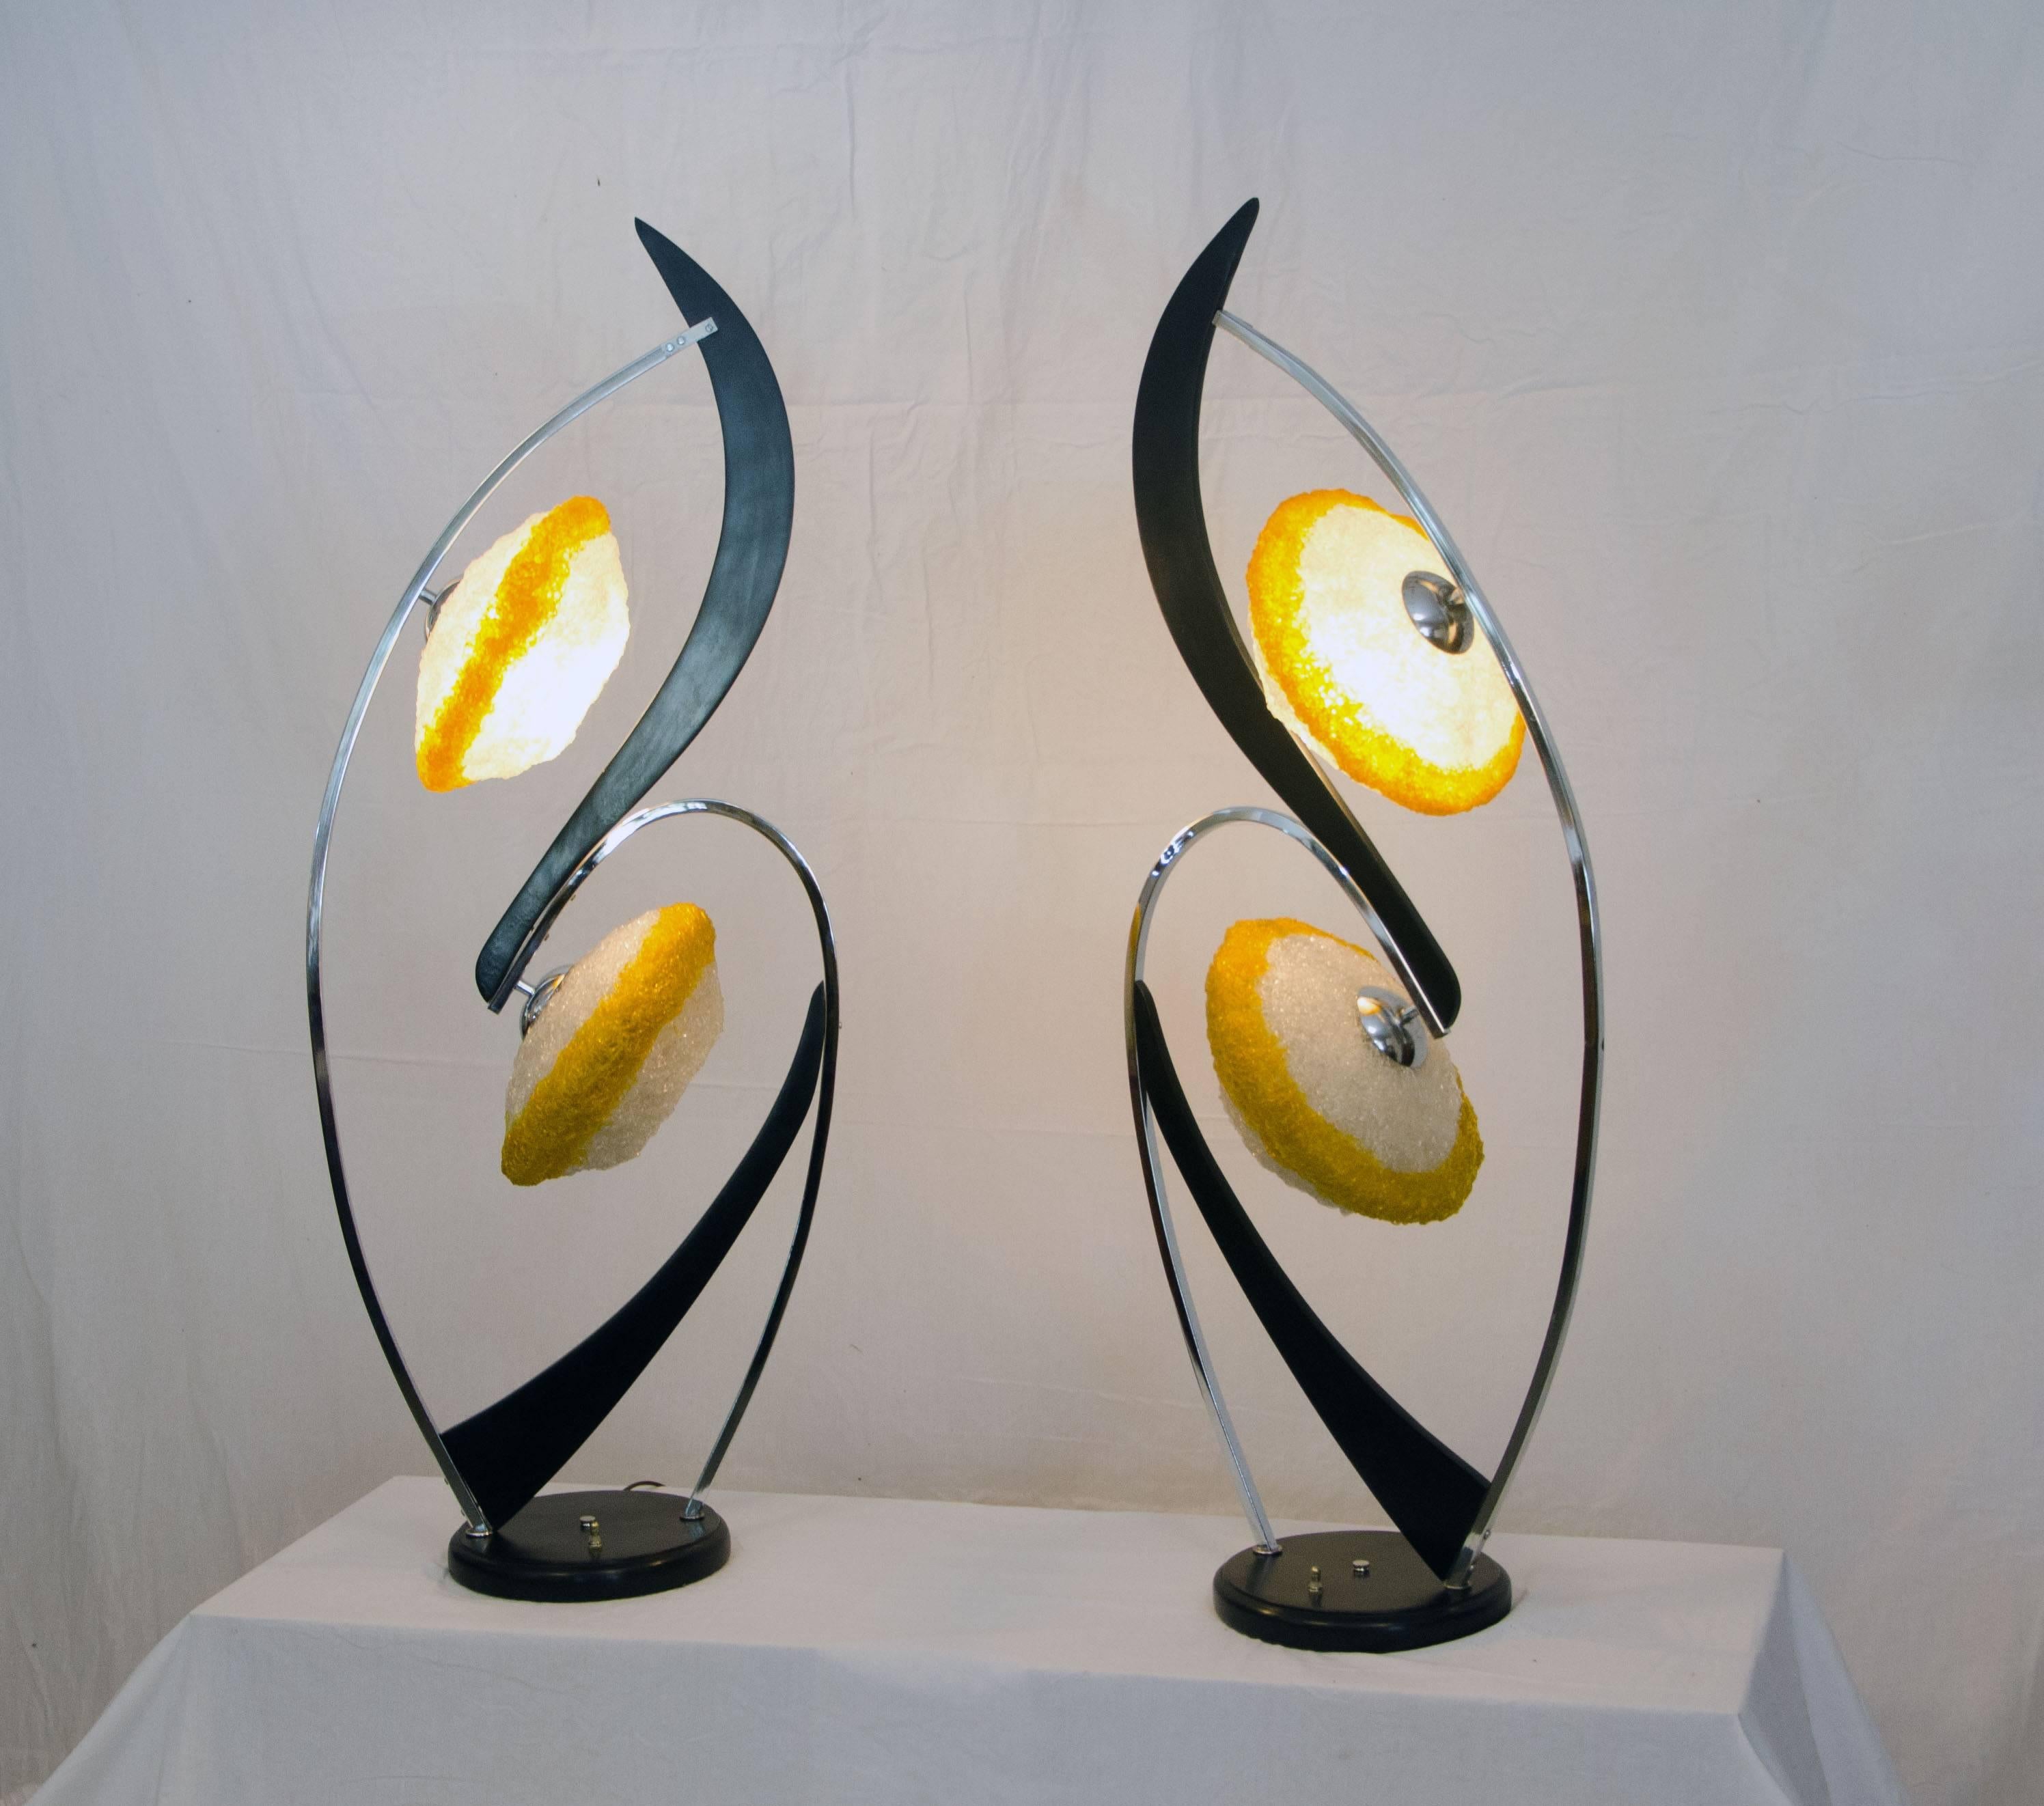 This wonderfully outrageous monumental pair of lamps will really make a statement. Manufactured in the 1950s by The Majestic Lamp Company, NYC. which ended production in 1963. Acrylic spaghetti shades are two toned. All parts of lamps are original,